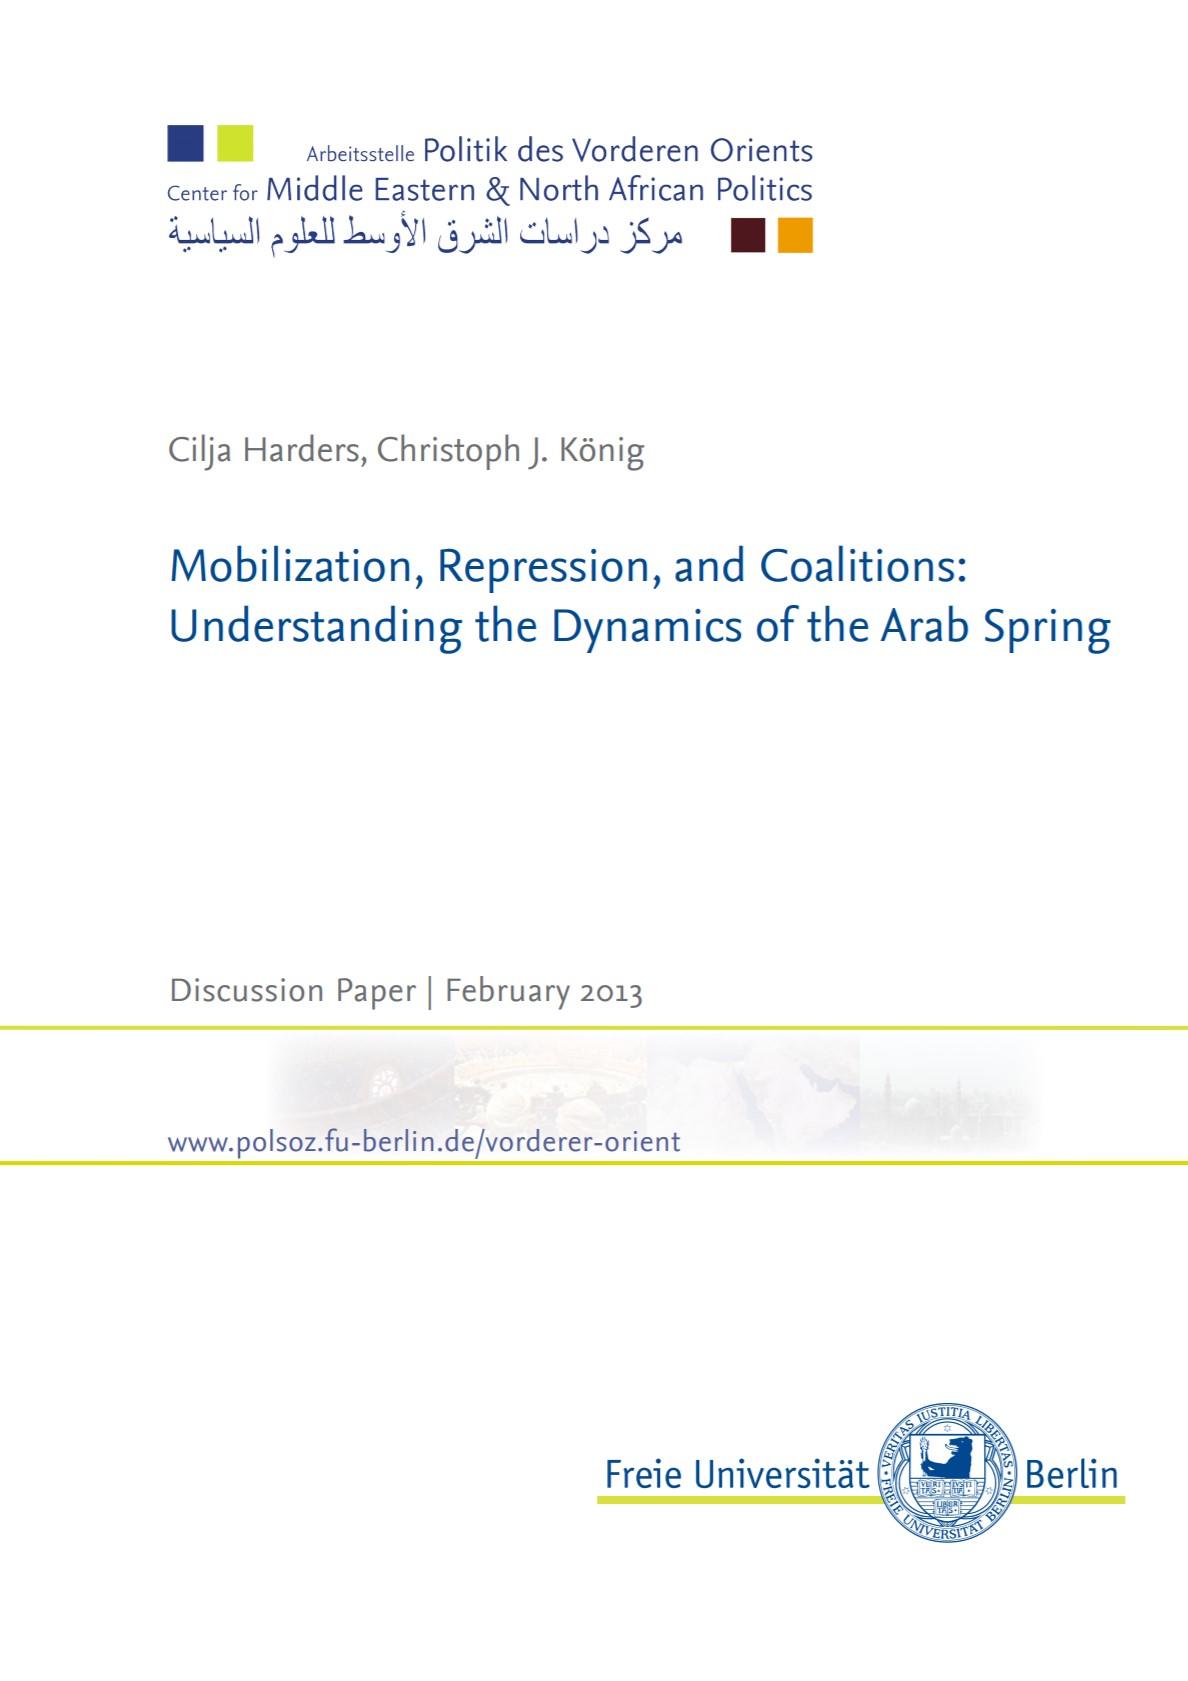 Mobilization, Repression, and Coalitions. Understanding the Dynamics of the Arab Spring